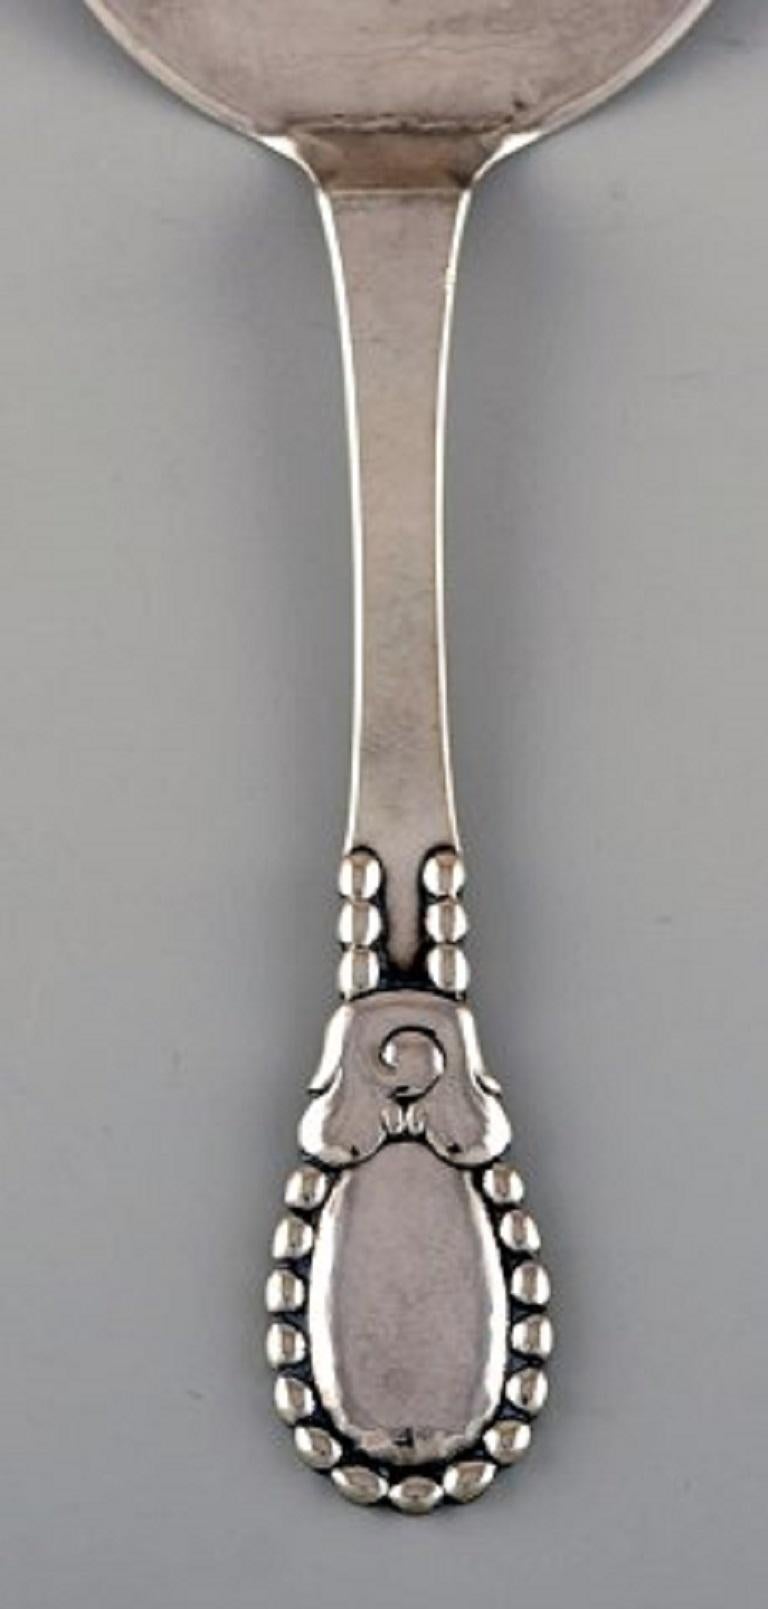 Evald Nielsen number 13 serving spade in hammered all silver 830. Dated 1922.
Length: 16.5 cm.
Stamped.
In excellent condition.
Our skilled Georg Jensen silversmith / jeweler can polish all silver and gold so that it looks like new. The price is